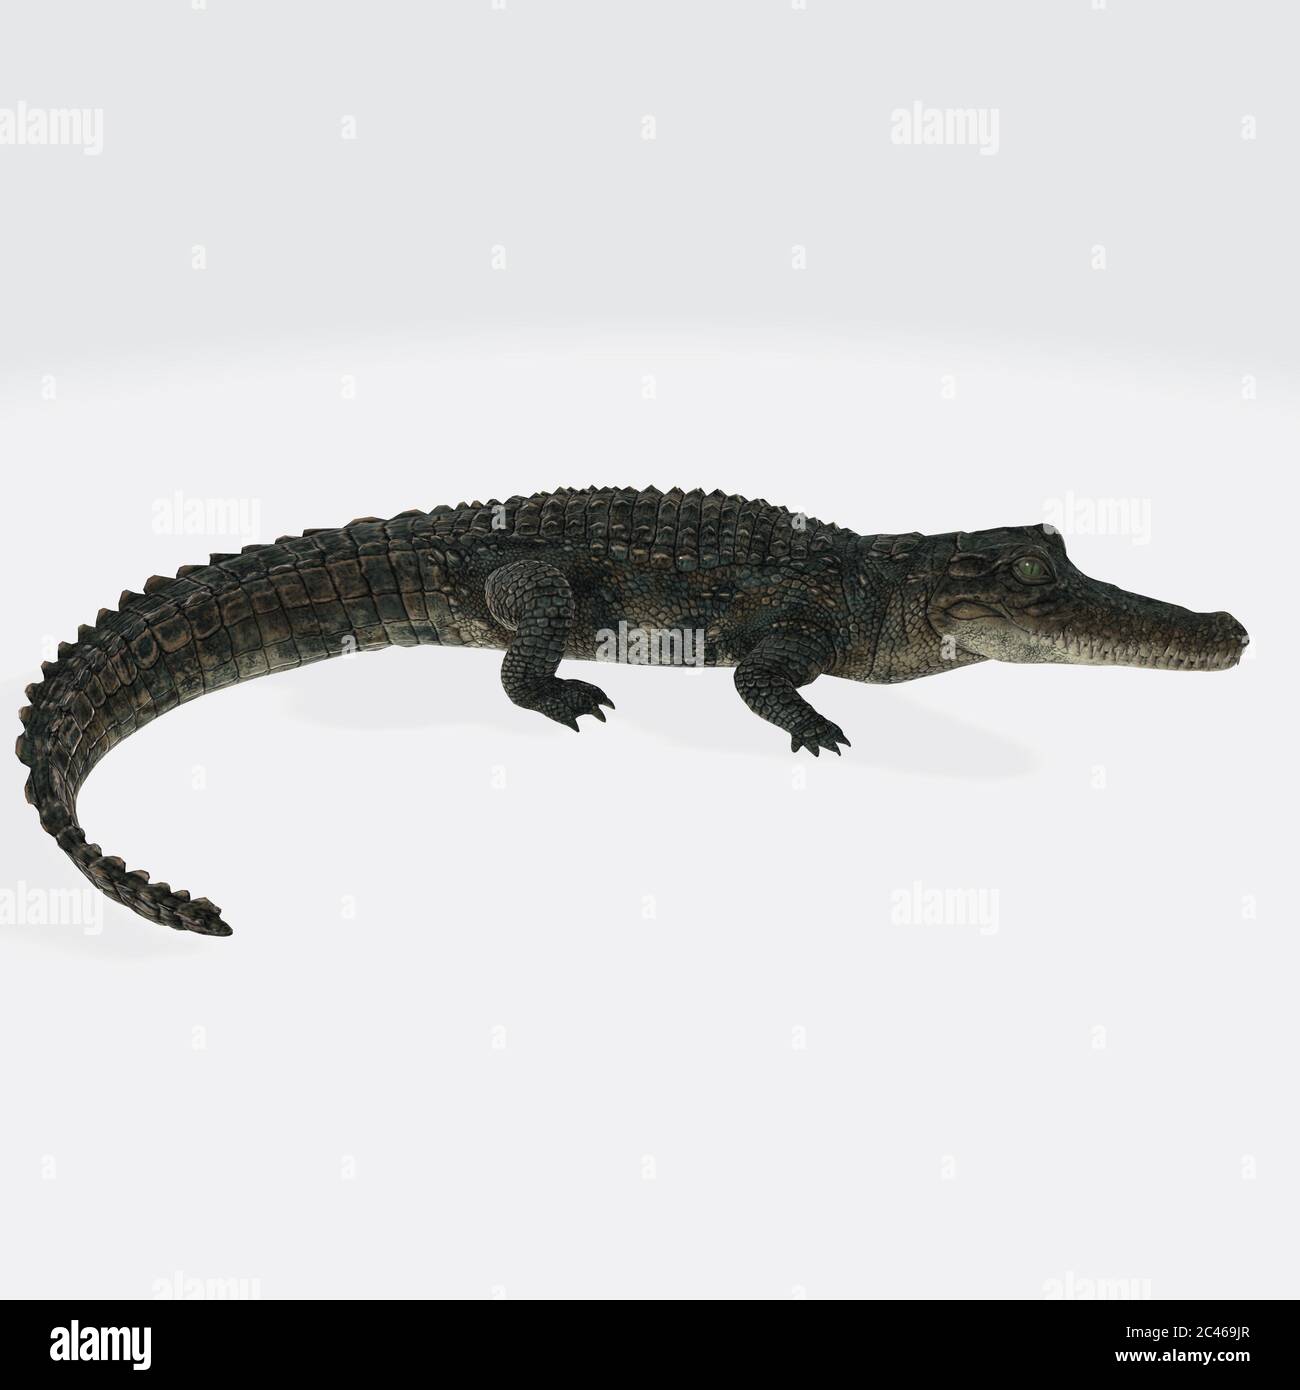 Graphic illustration of 3D rendered crocodile isolated on the white background Stock Photo